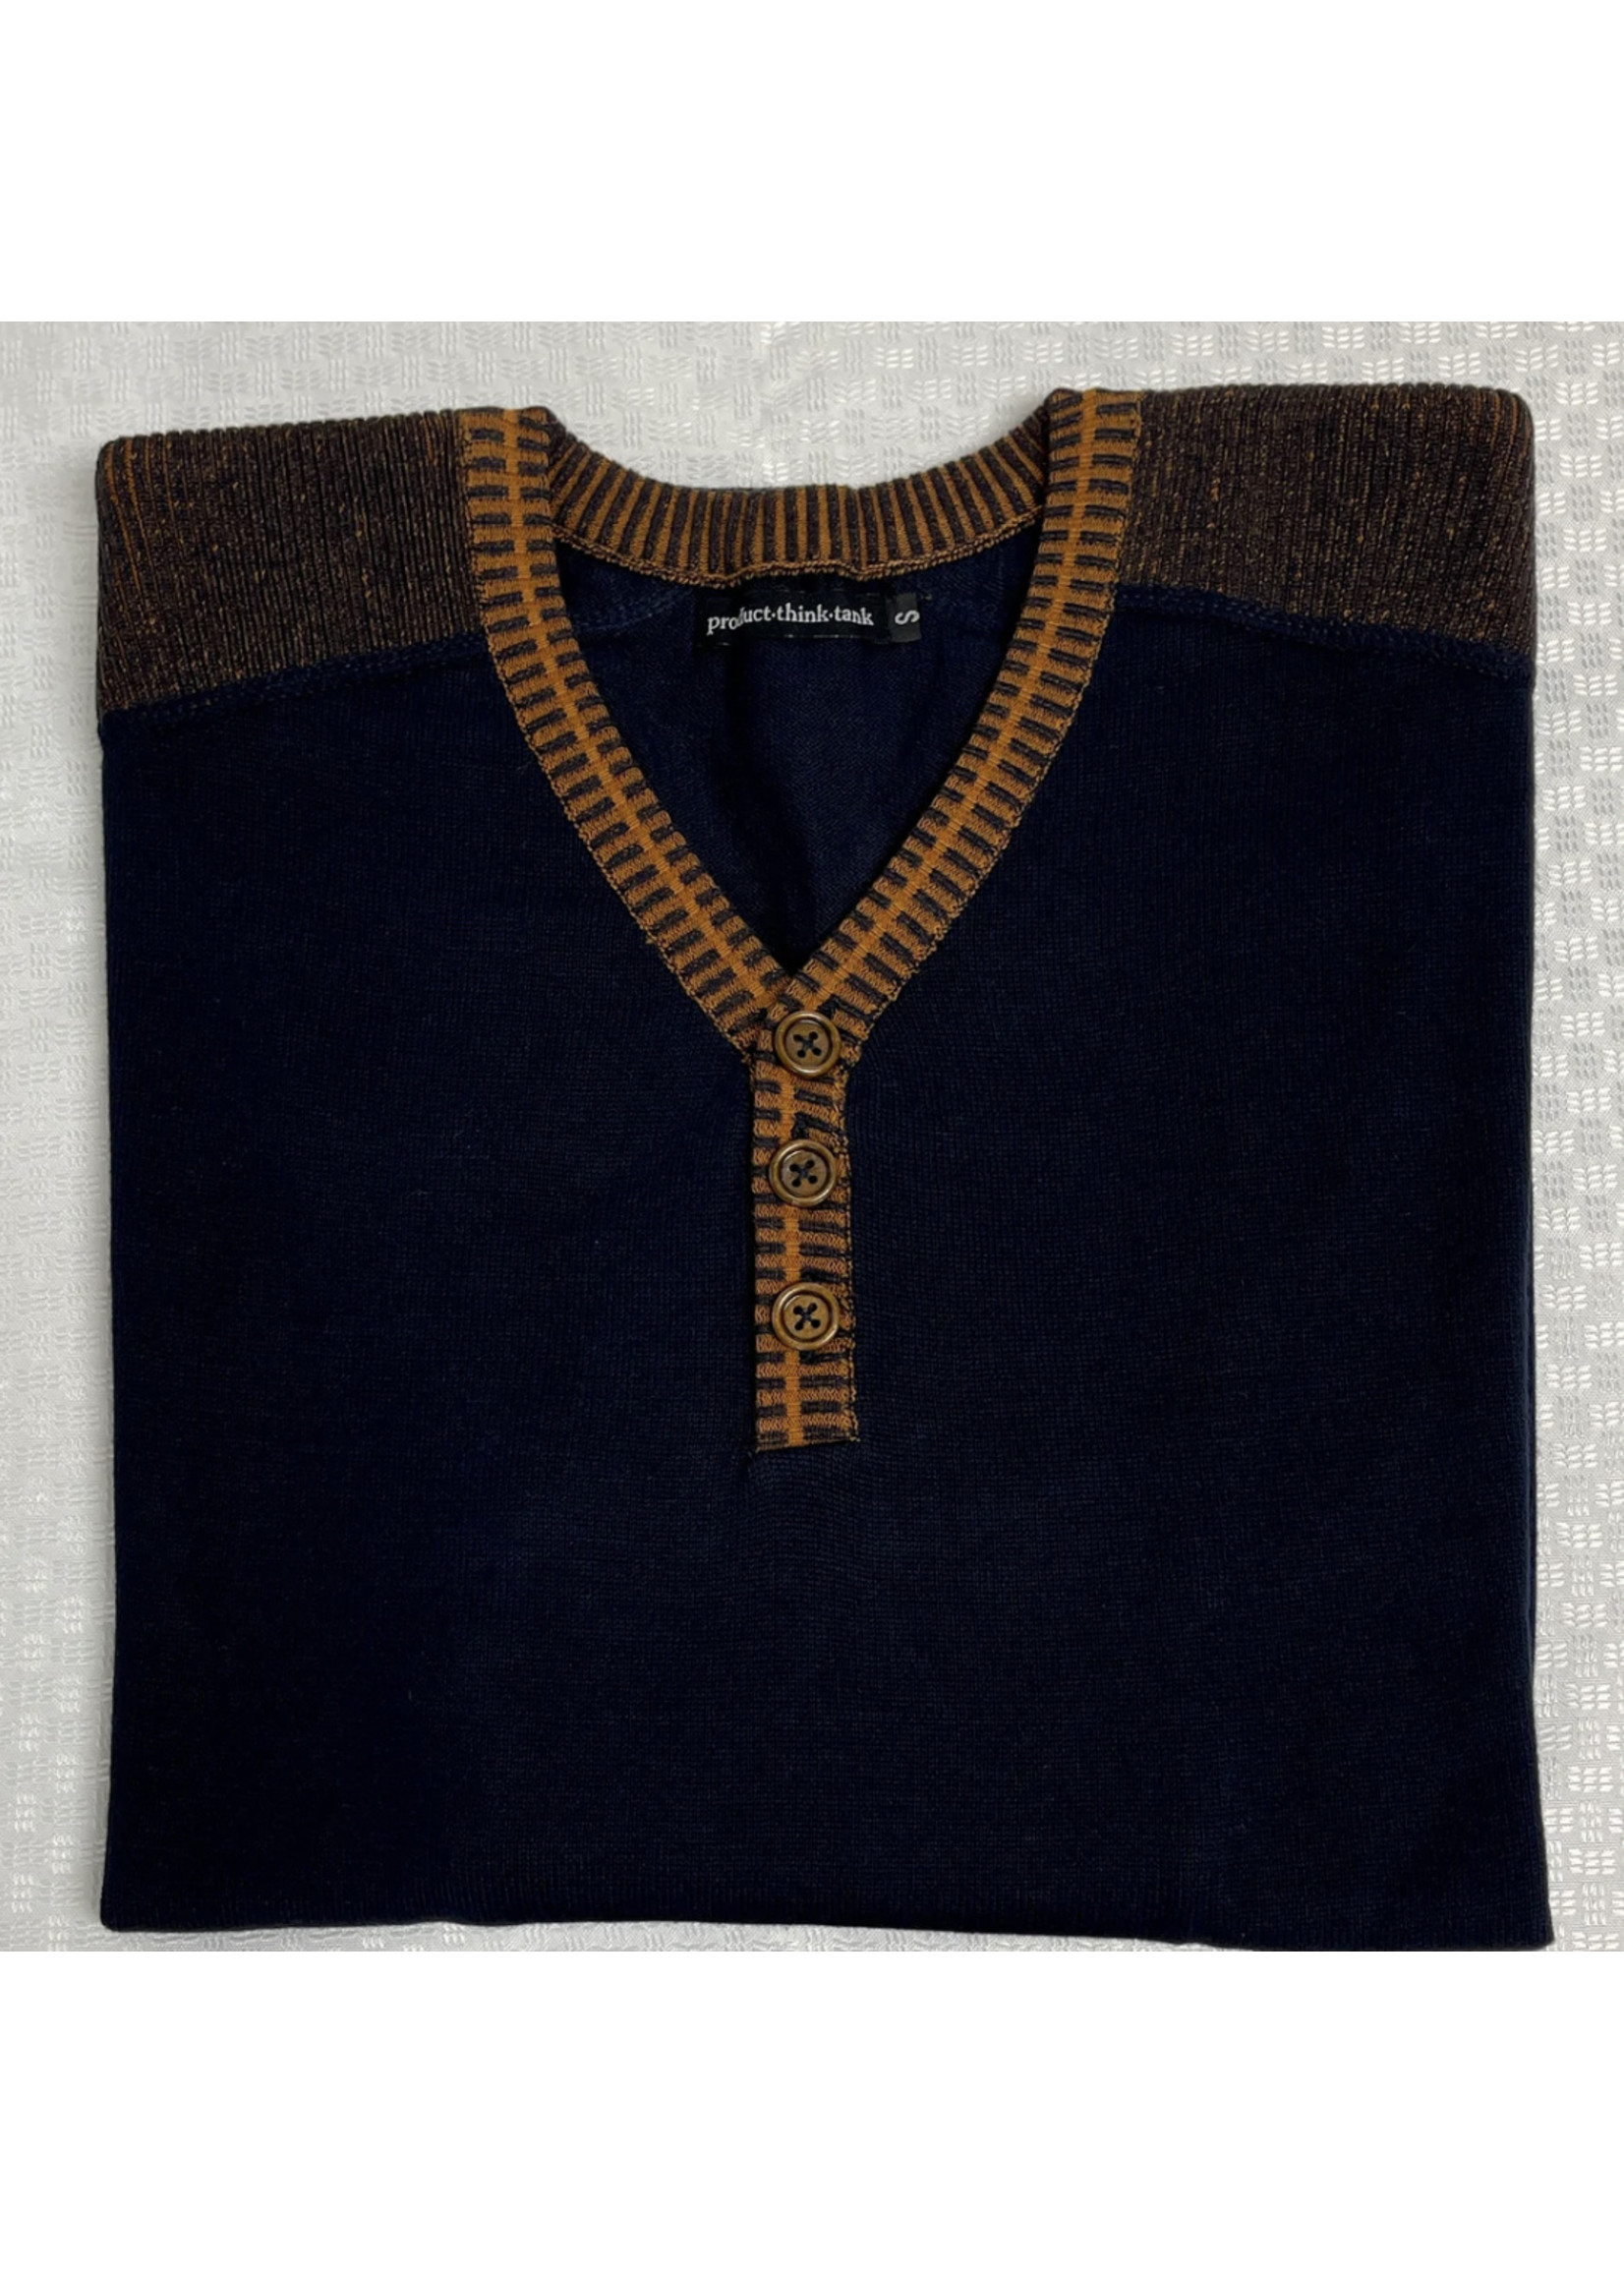 Product Think Tank PTT West Hill Henley Cotton Sweater